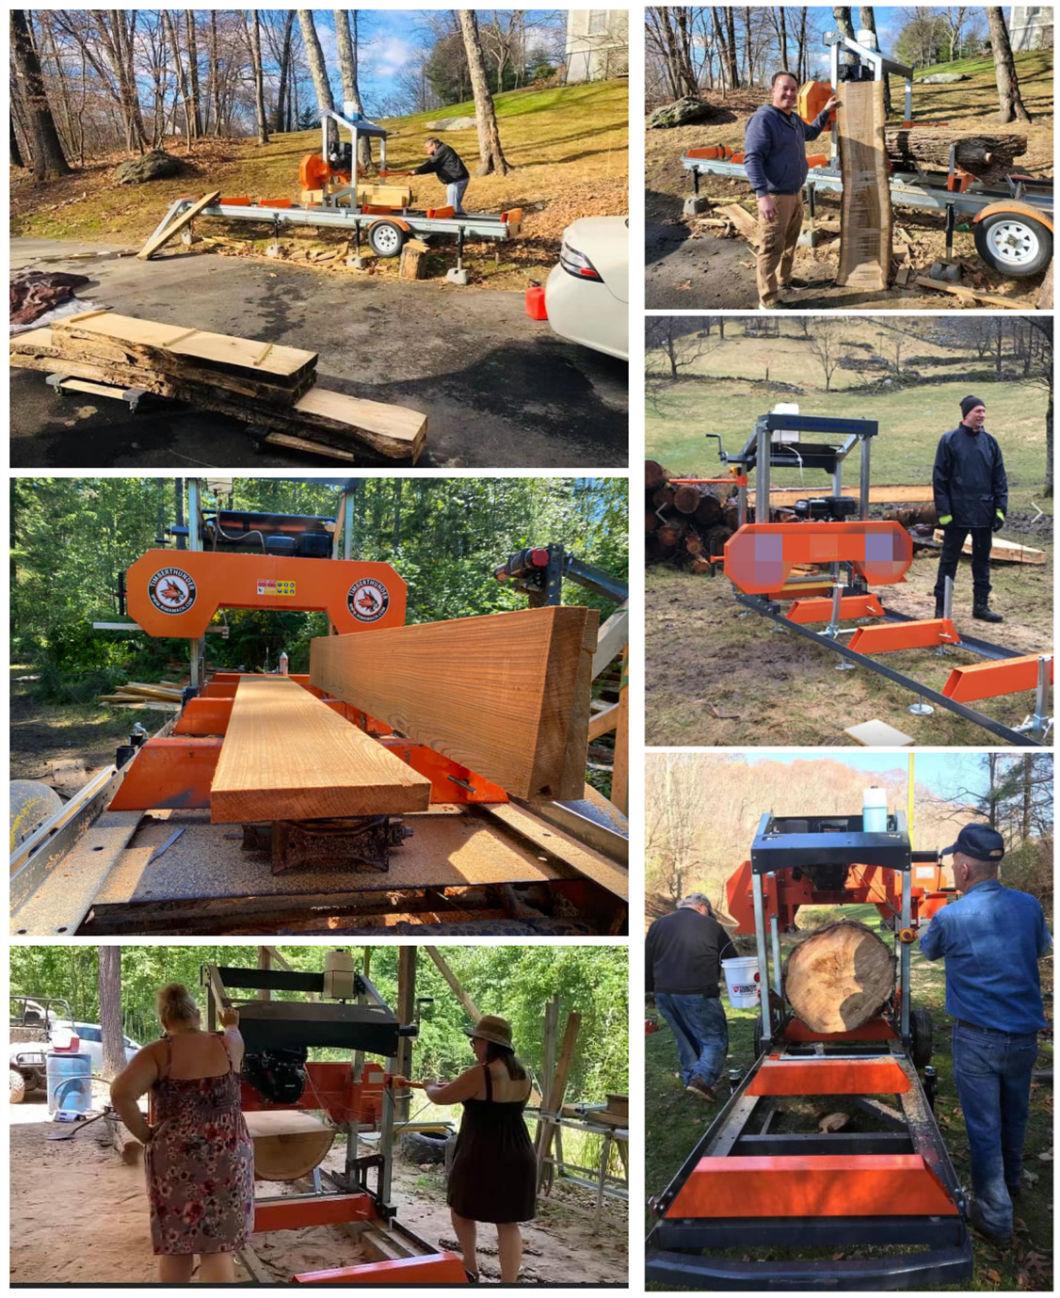 26inch Gasoline Portable Sawmill with Power Lift